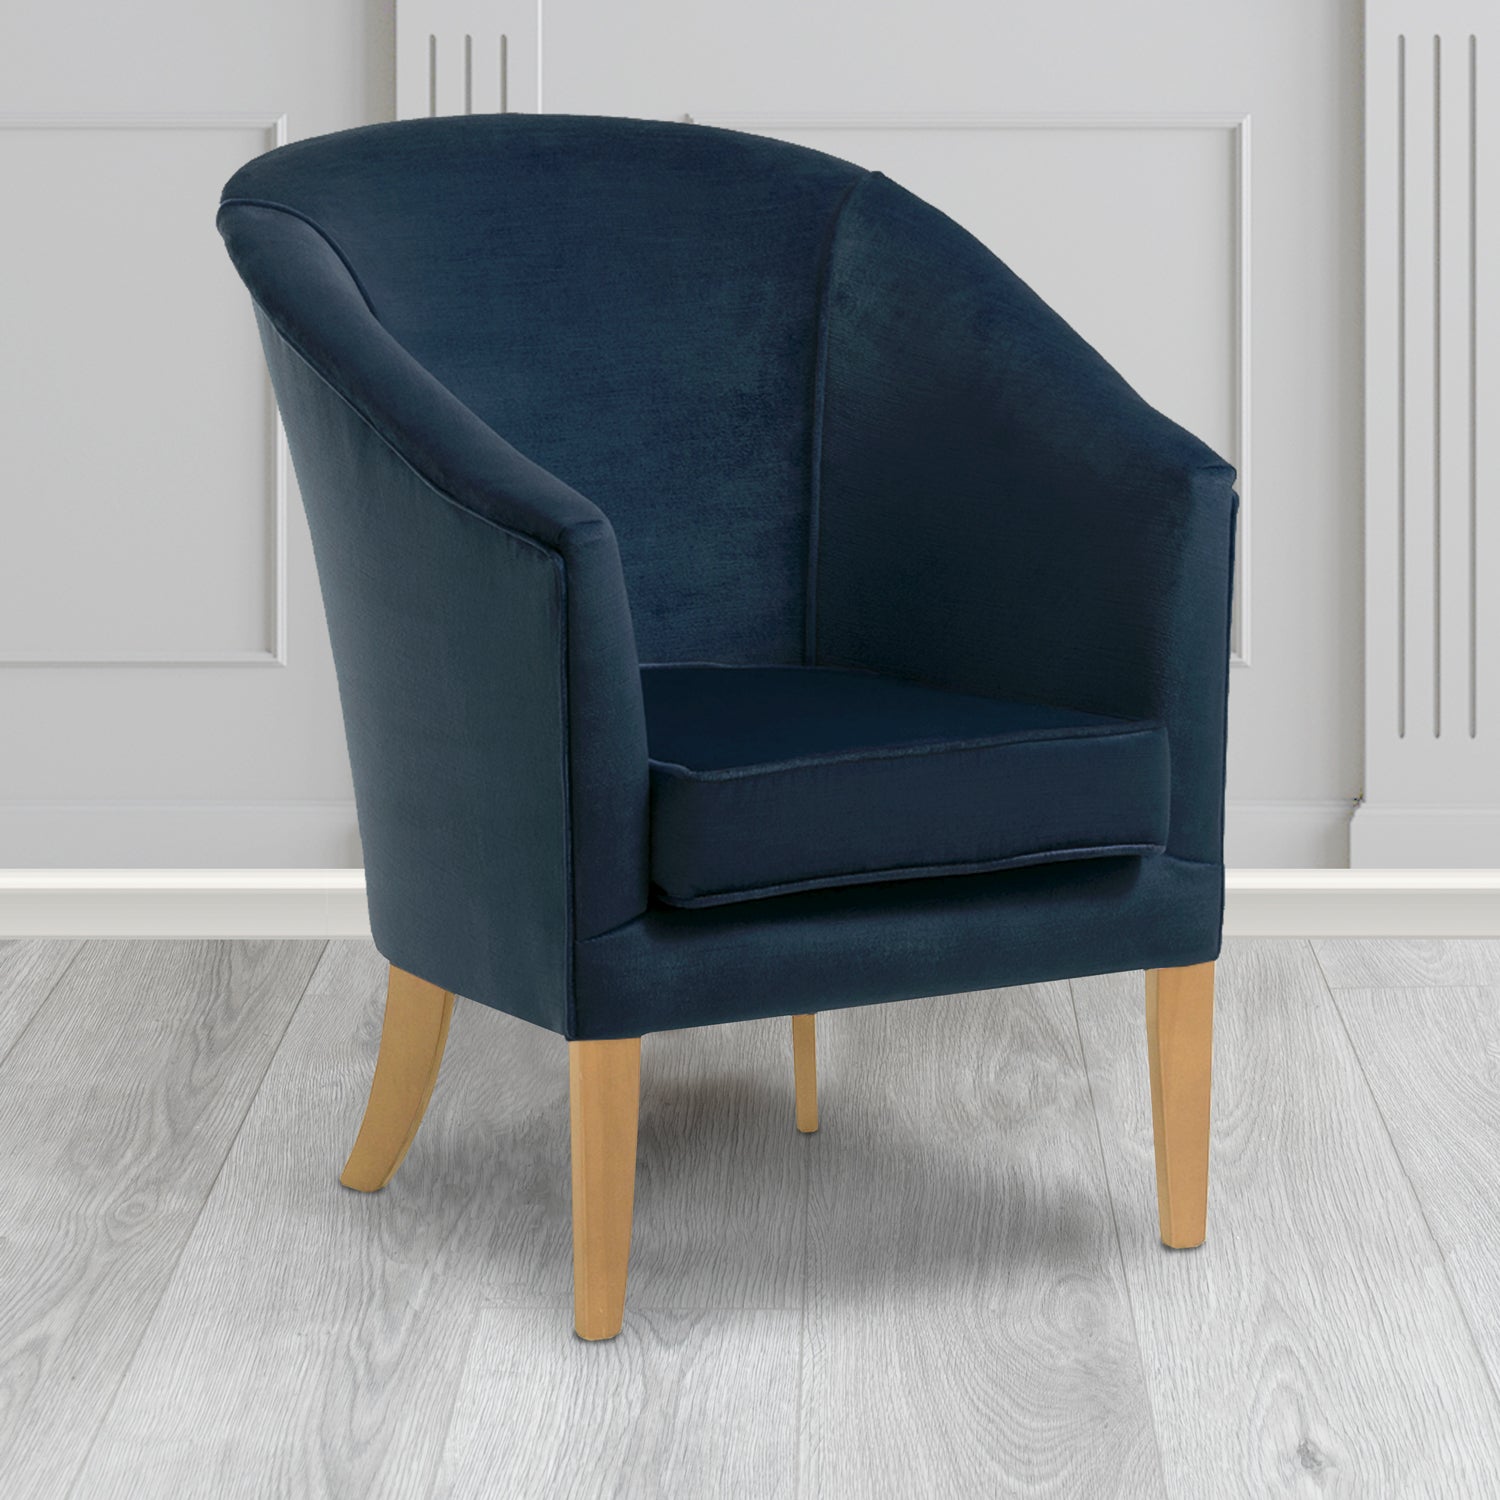 Burton Tub Chair in Noble 192 Ink Crib 5 Velvet Fabric - Water Resistant - The Tub Chair Shop